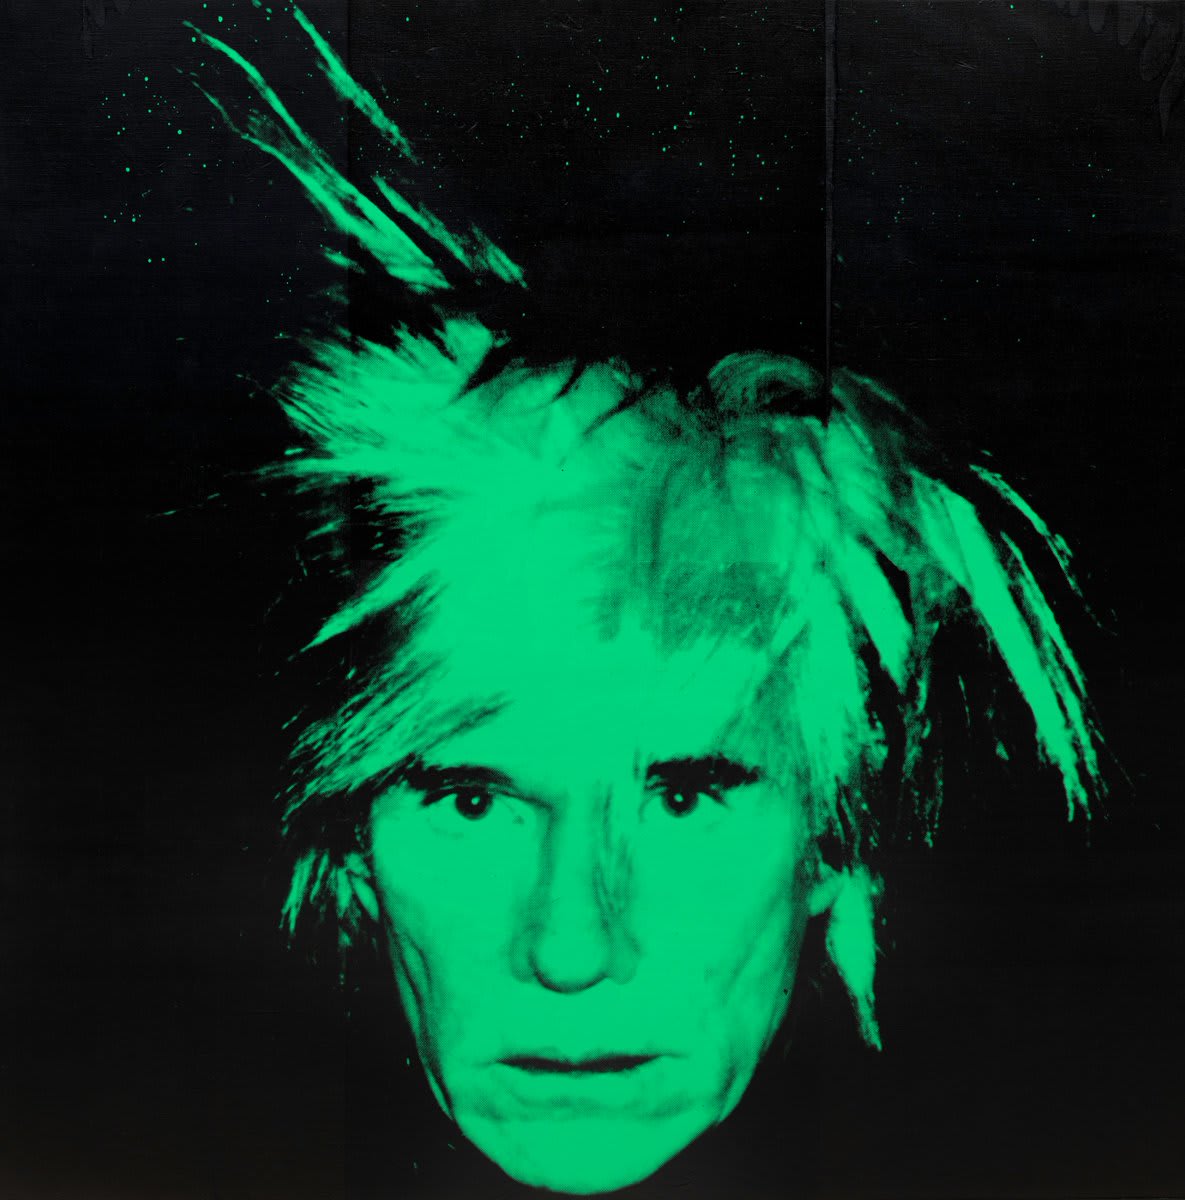 "I think somebody should be able to do all my paintings for me." Happy birthday to Andy Warhol! 🎂 Warhol used found printed images from newspapers, publicity stills, and ads as his subject matter and adopted silkscreening as his medium. Learn more: